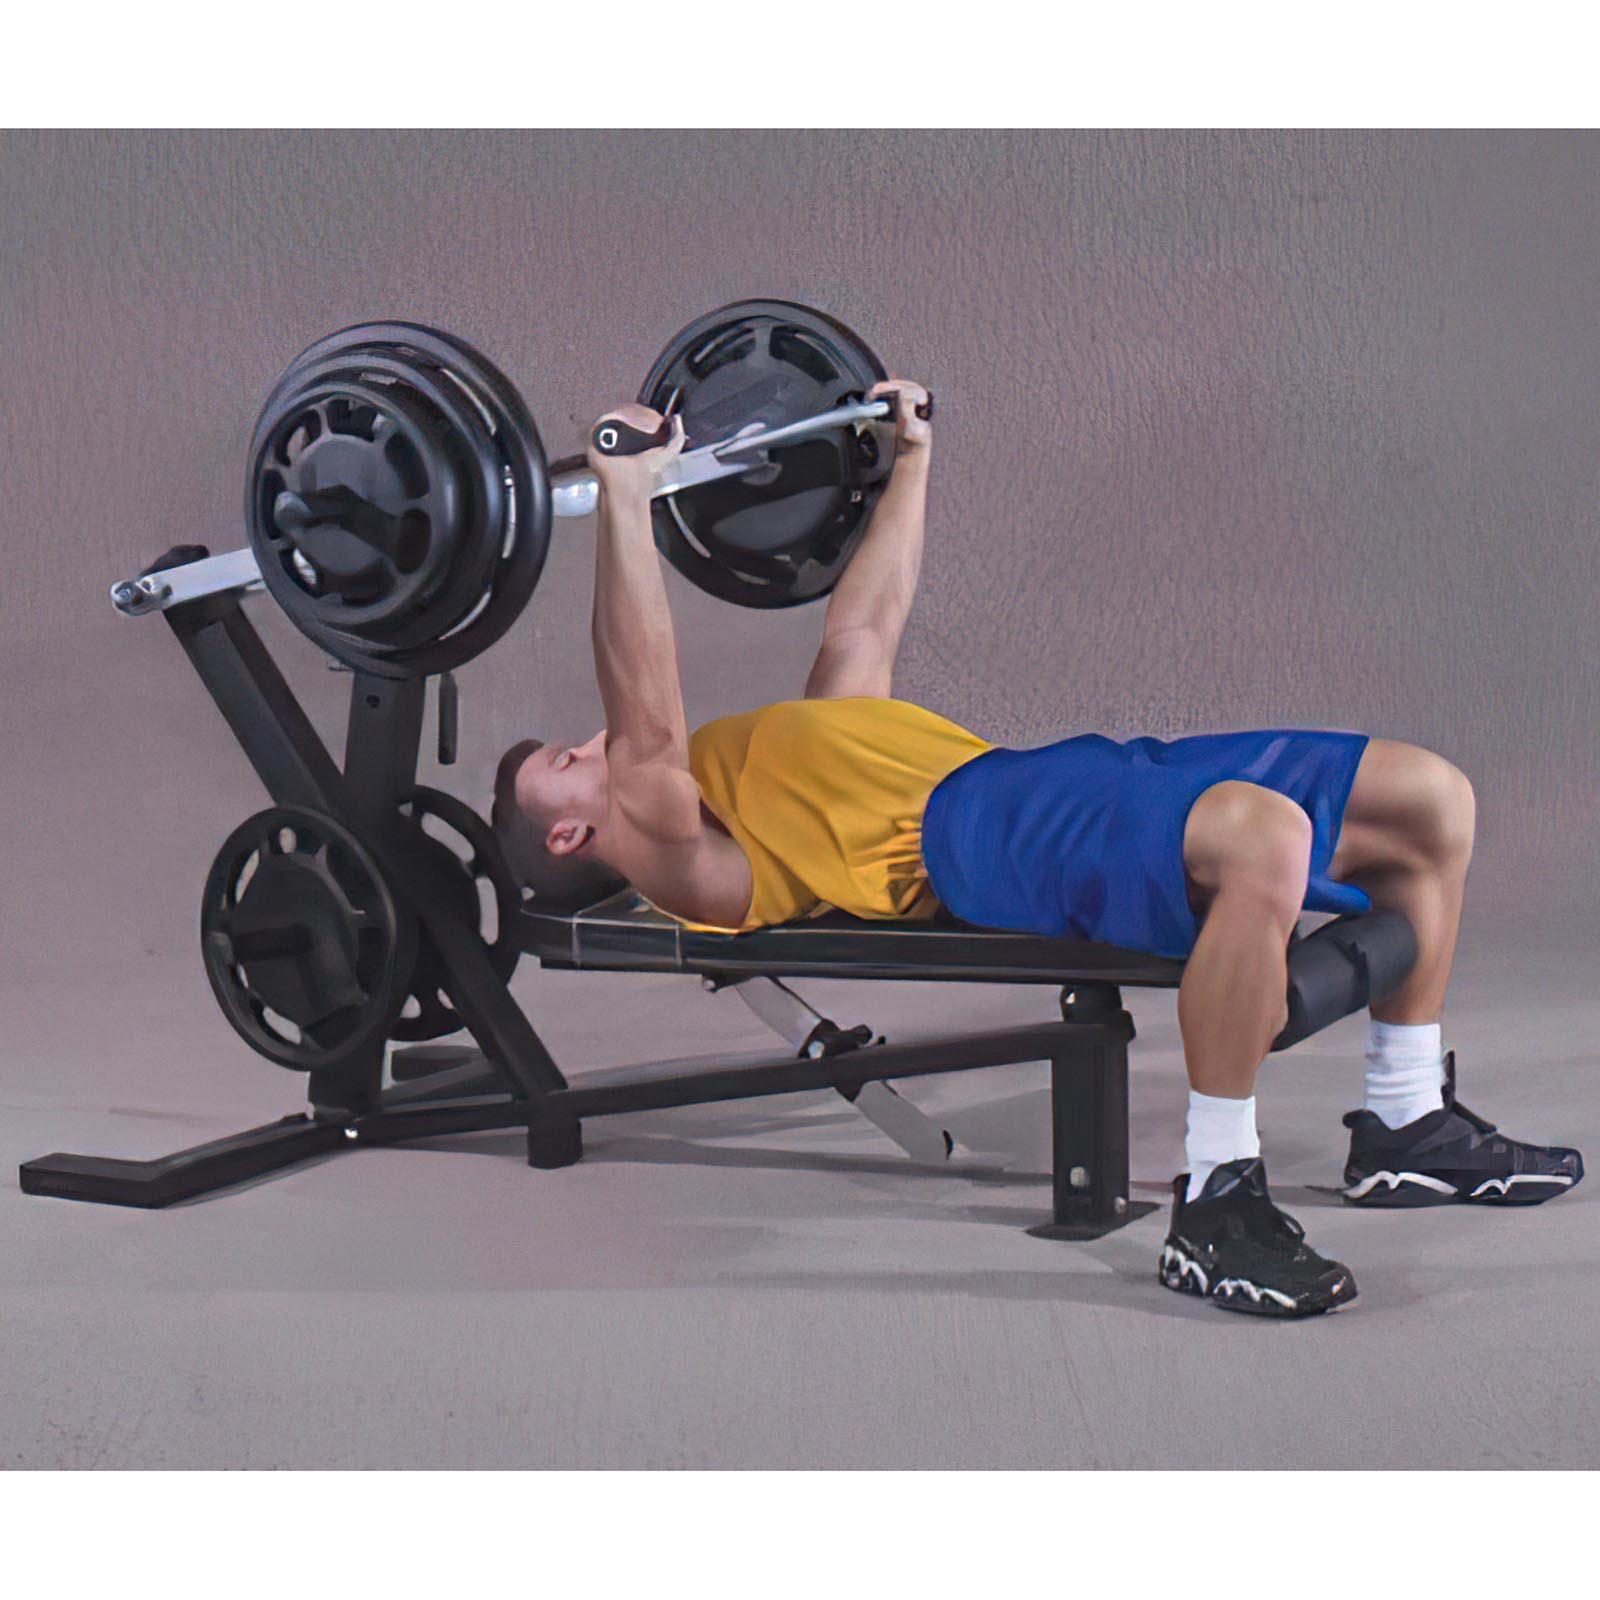 Powertec Leverage Chest Press with a man doing a leverage bench press